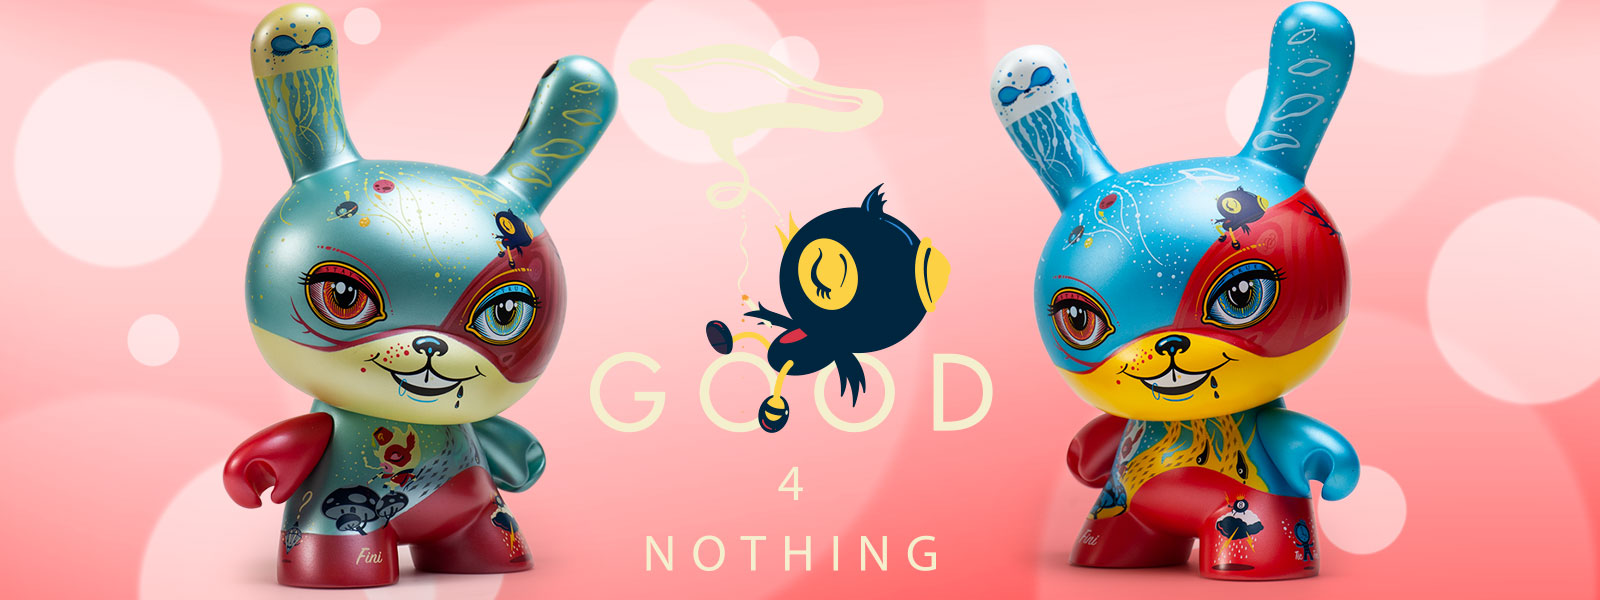 Good 4 Nothing 8" Dunnys by 64 Colors - Artist Laura Colors x Kidrobot